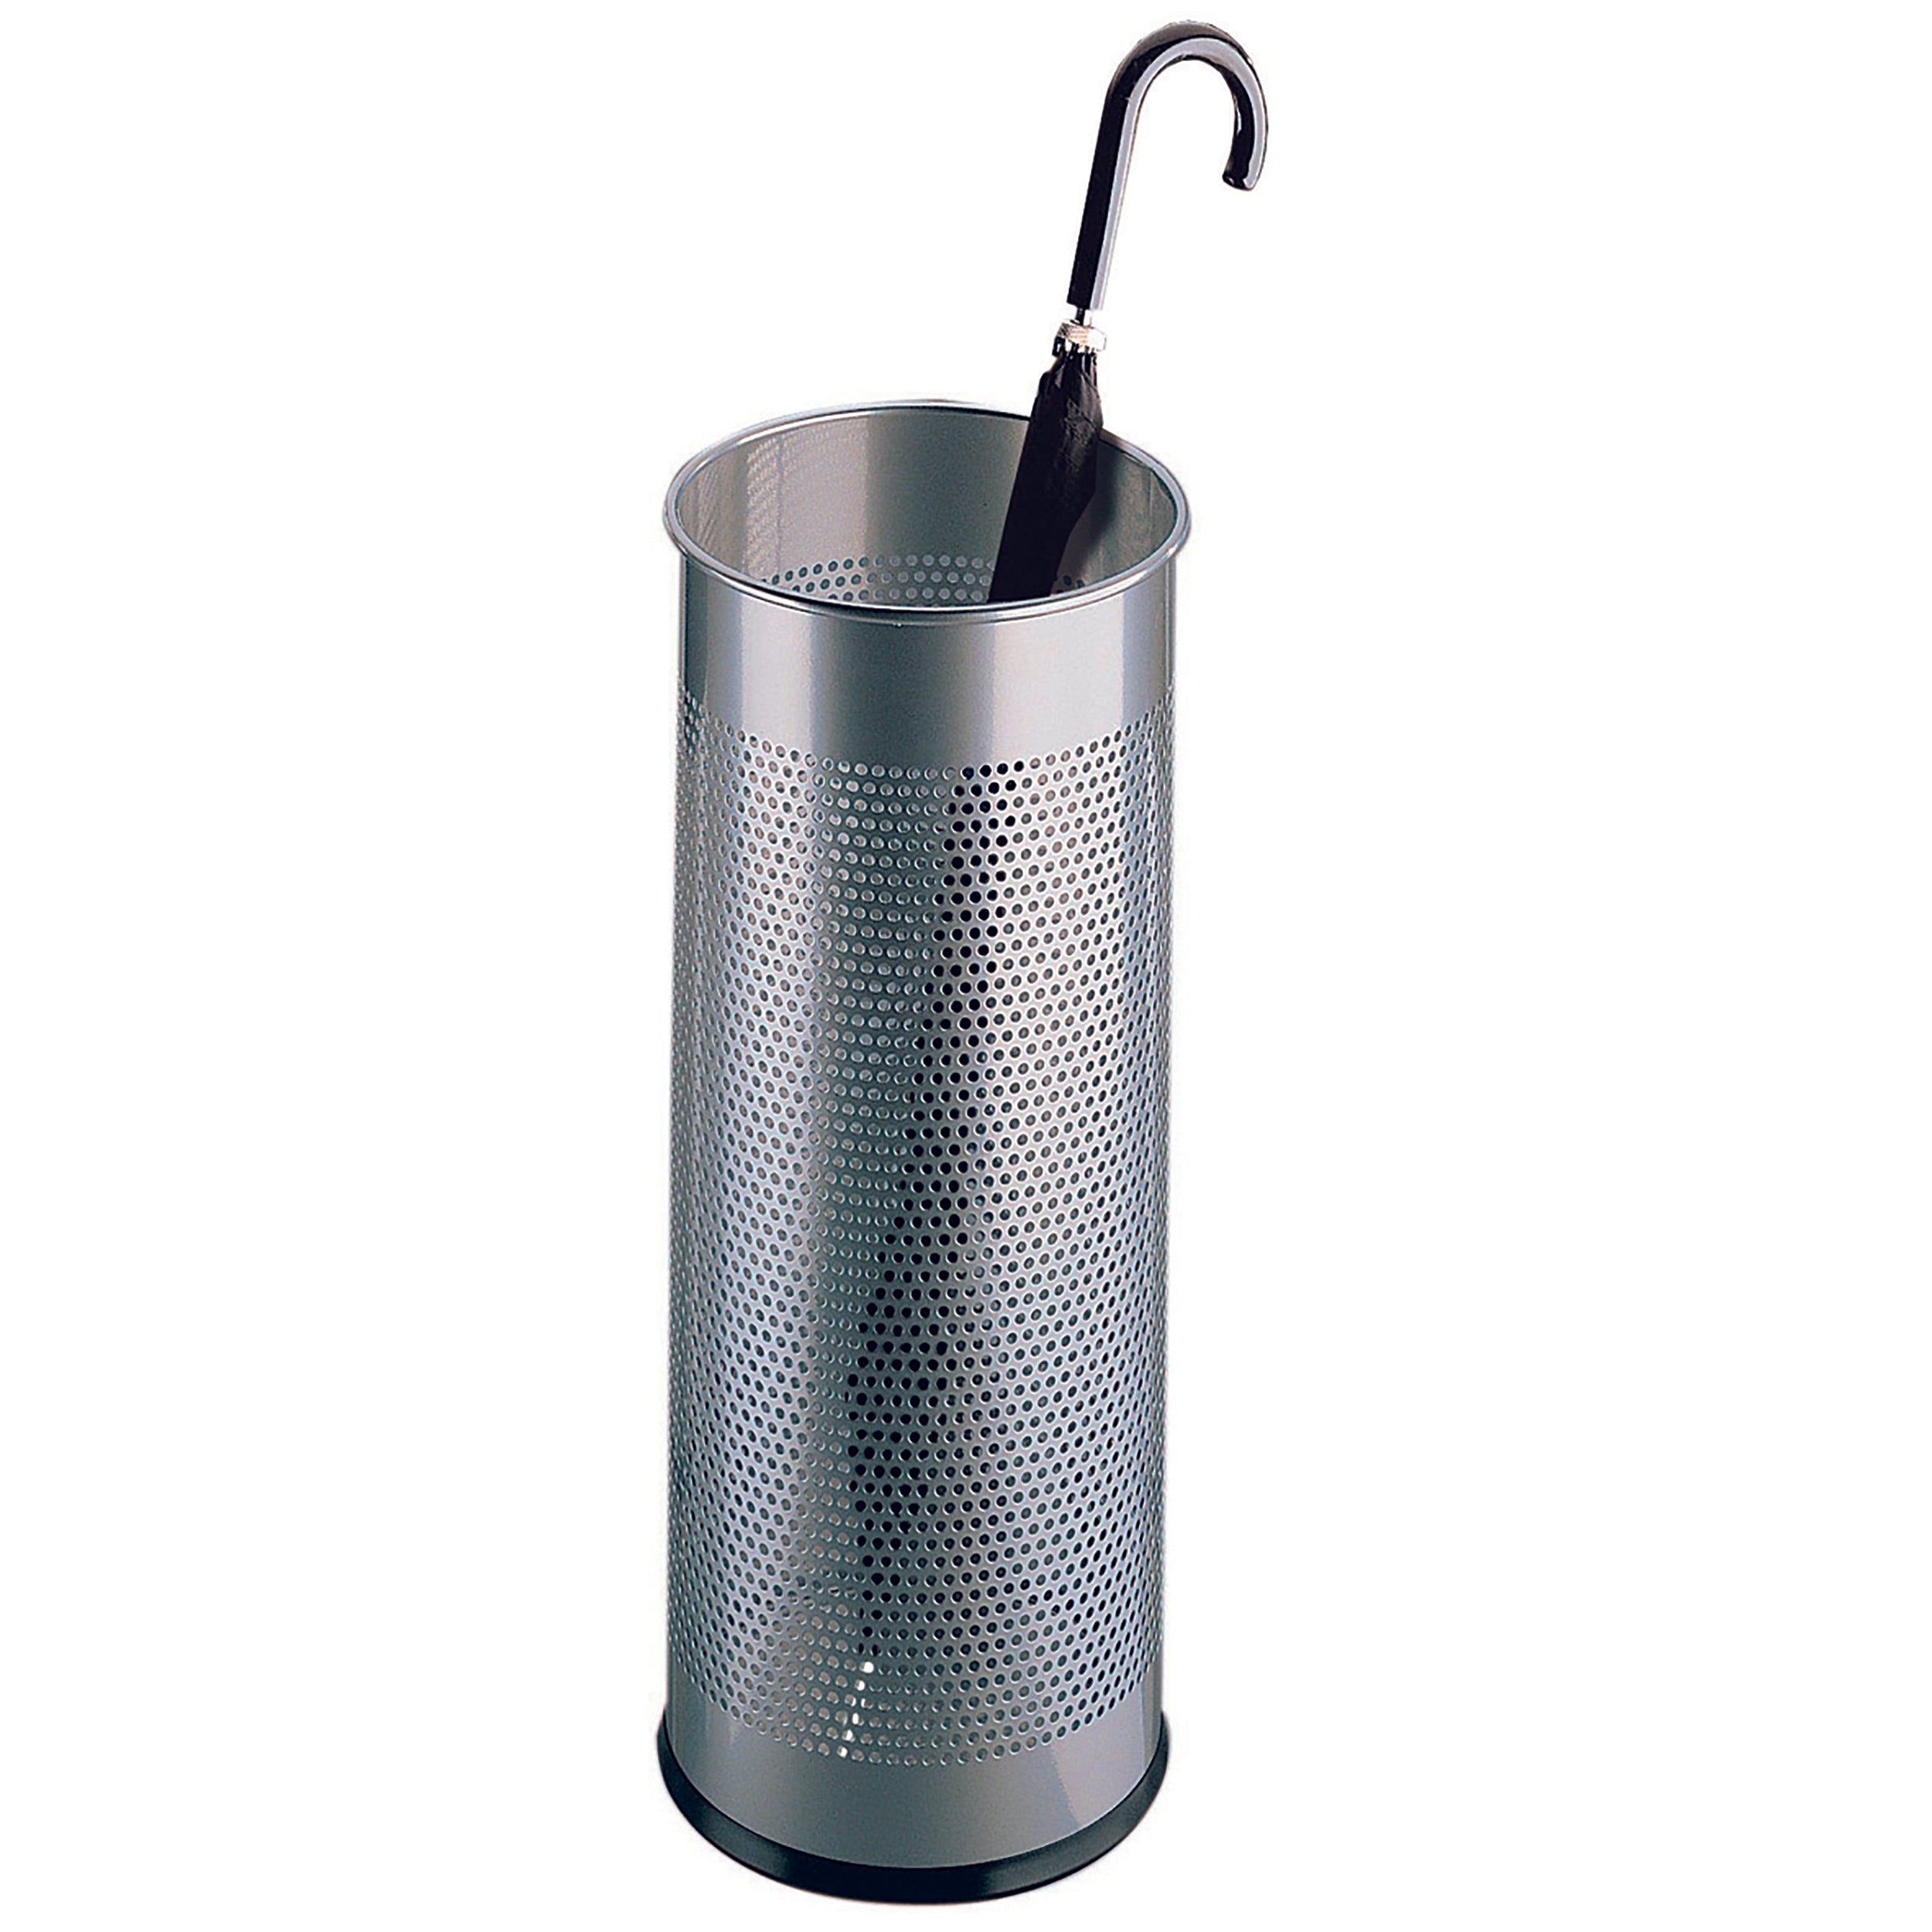 Silver stainless steel umbrella holder with decorative perforations.